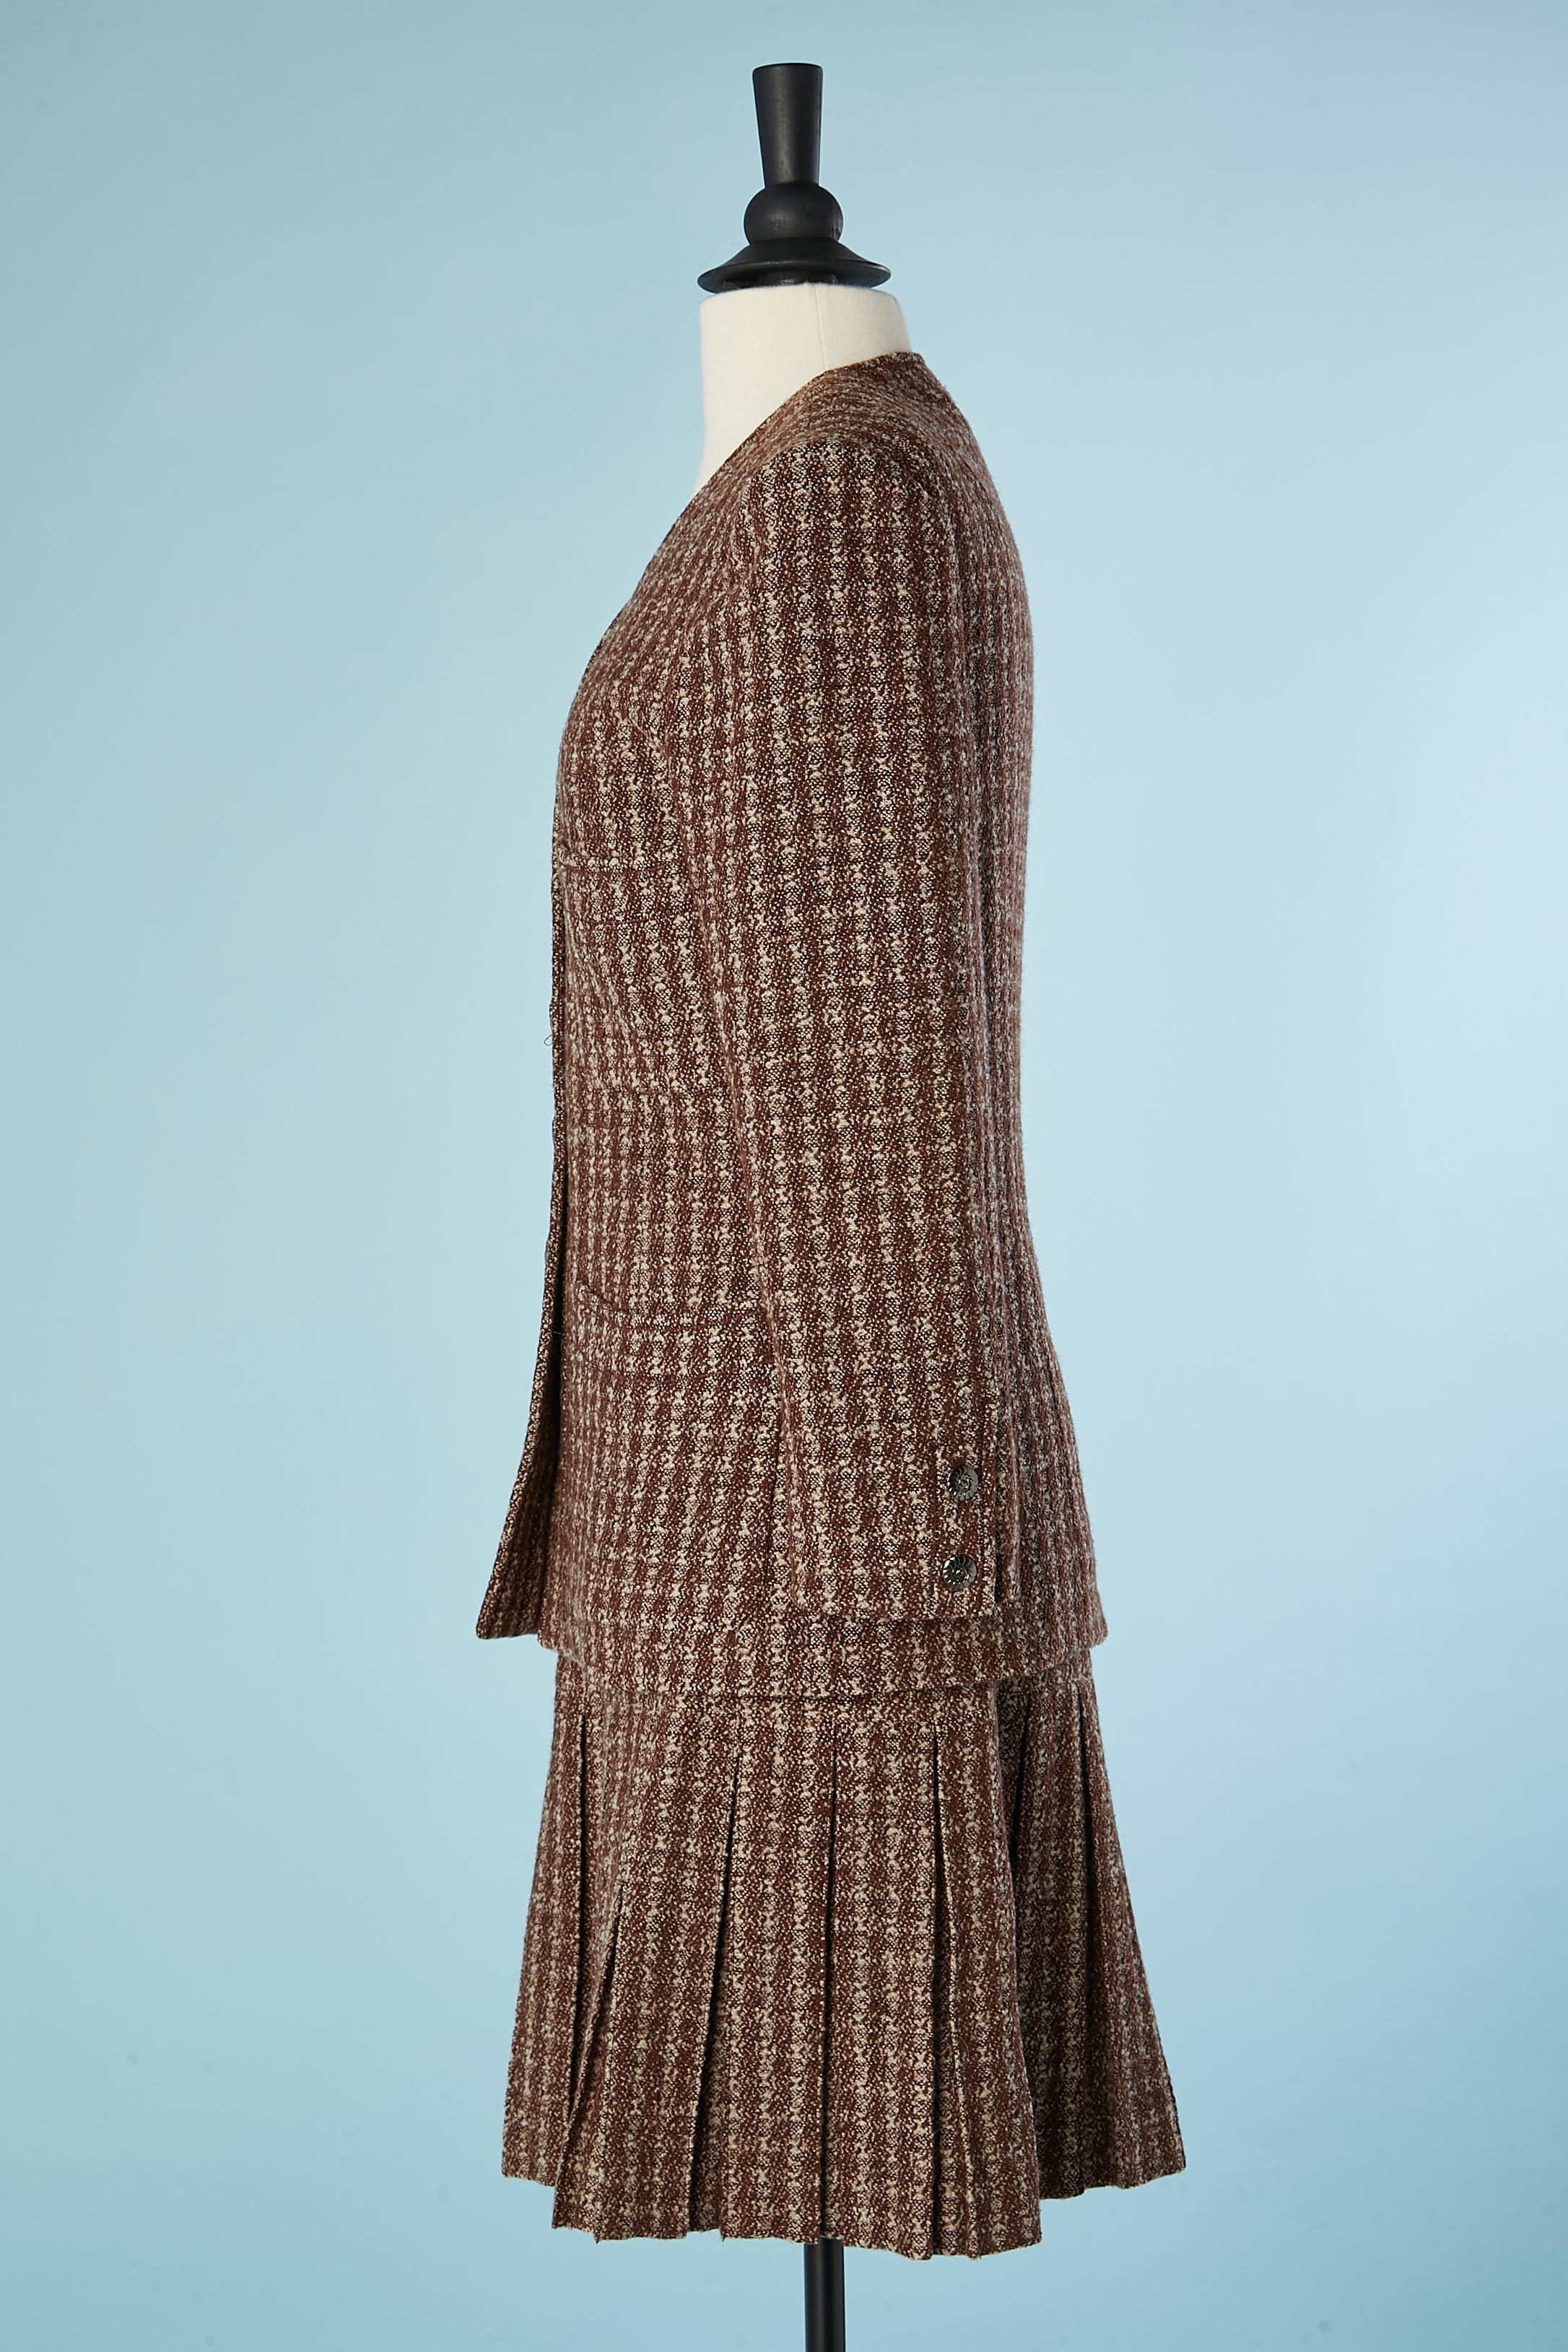 Brown tweed skirt-suit with pleated skirt Chanel Boutique  For Sale 1